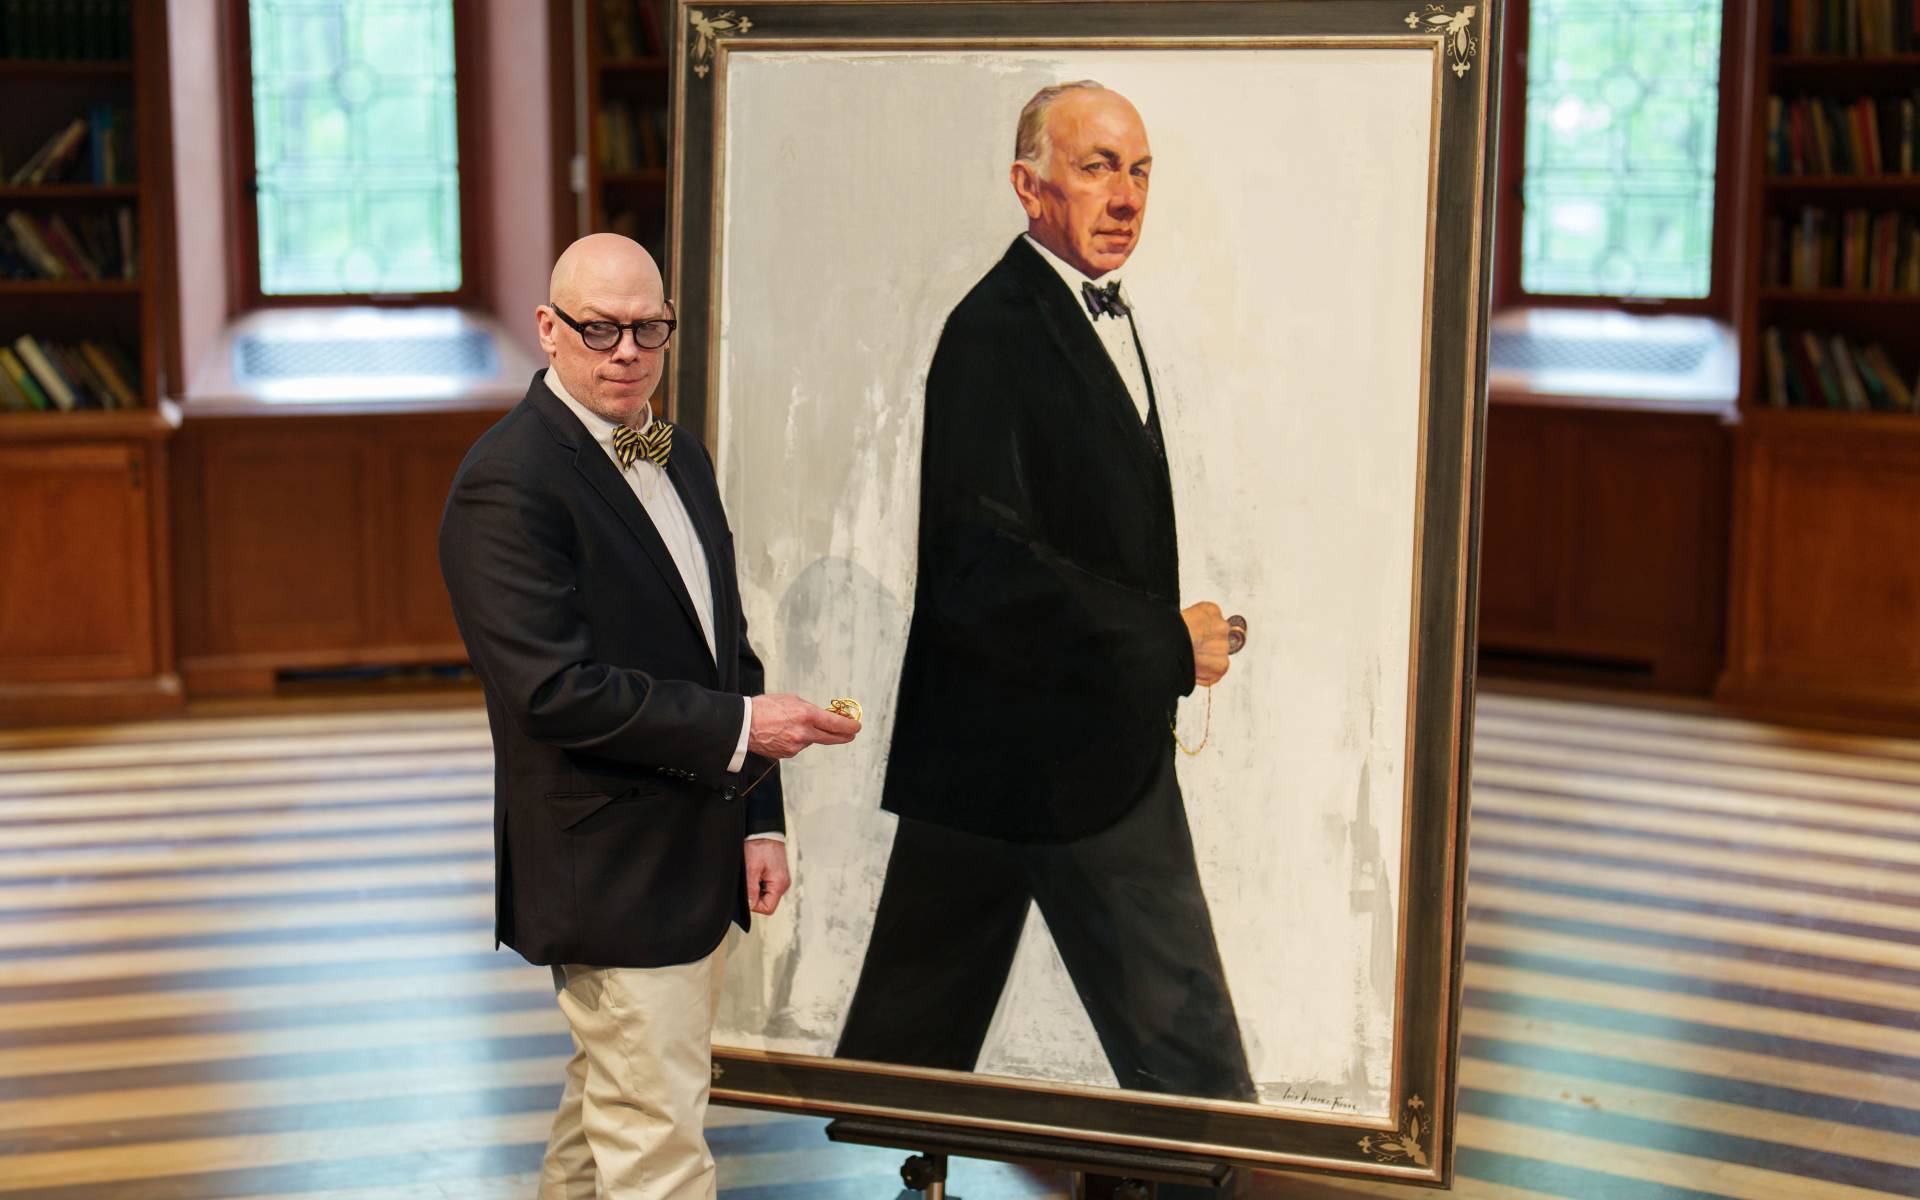 One of Jose Ferrer's sons, Rafael, poses in a similar way next to his father's portrait